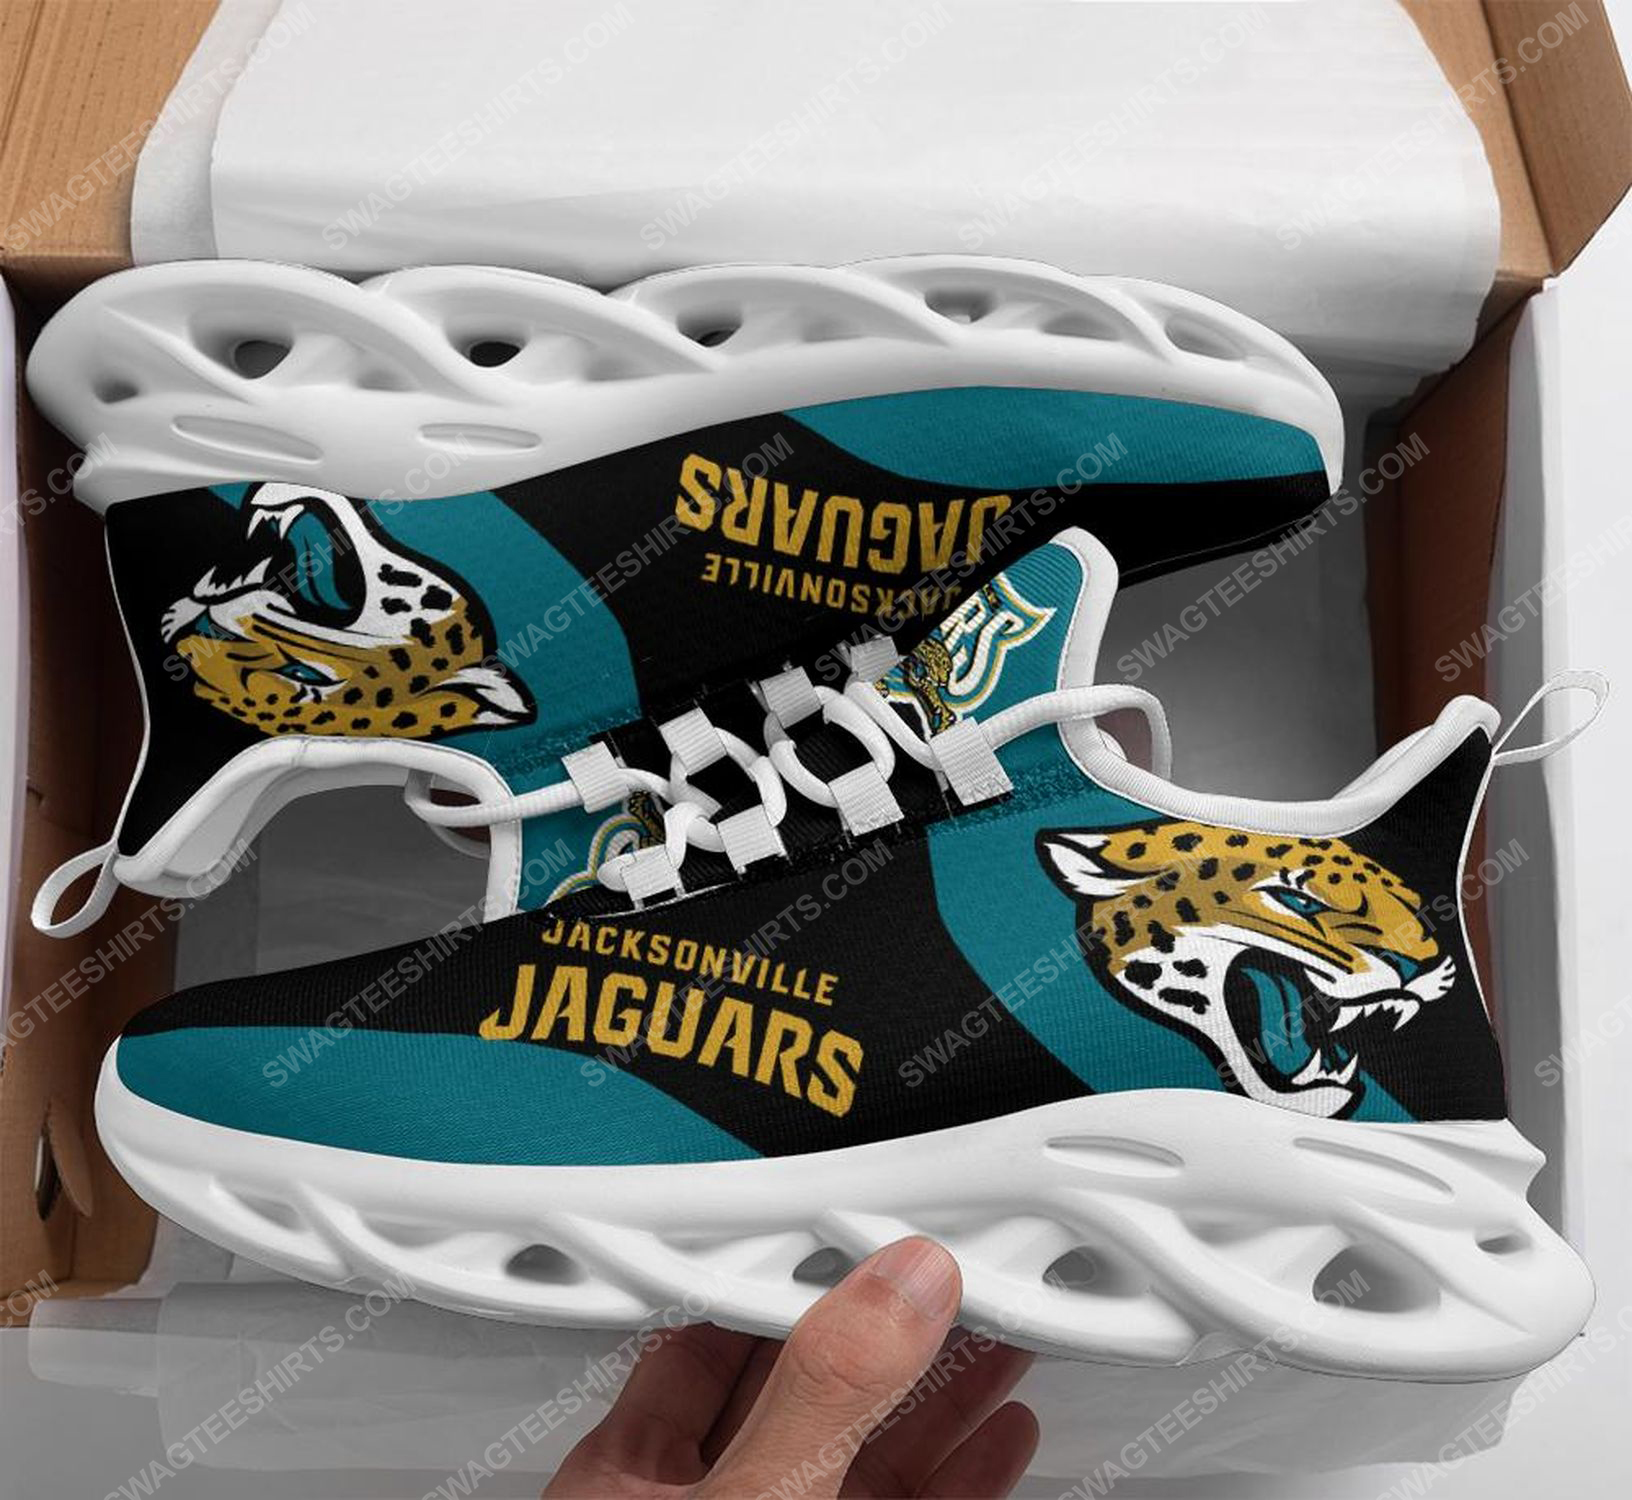 [special edition] The jacksonville jaguars football team max soul shoes – Maria